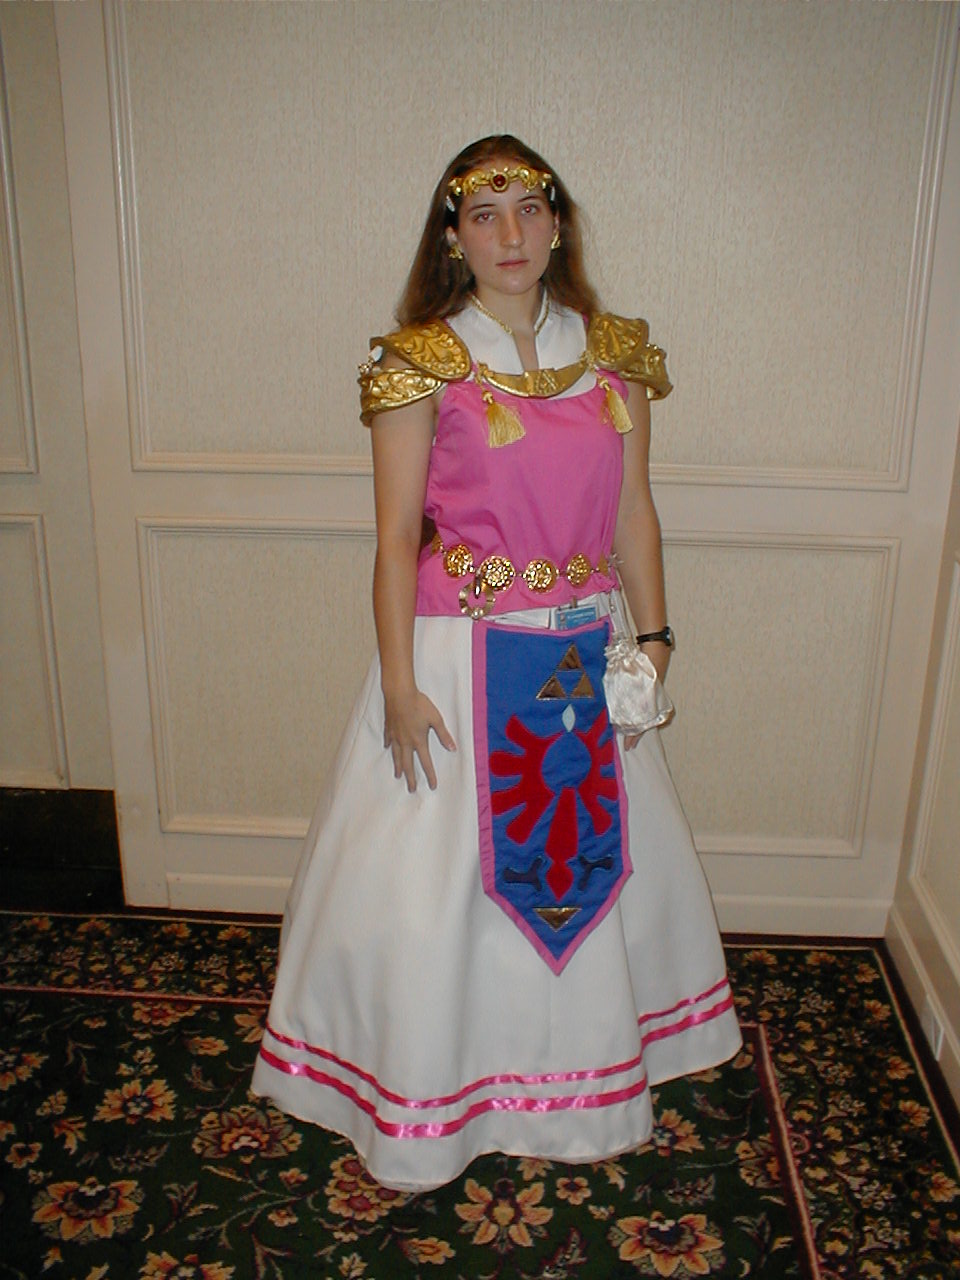 Camille Meehan as Princess Zelda from A Link to the Past